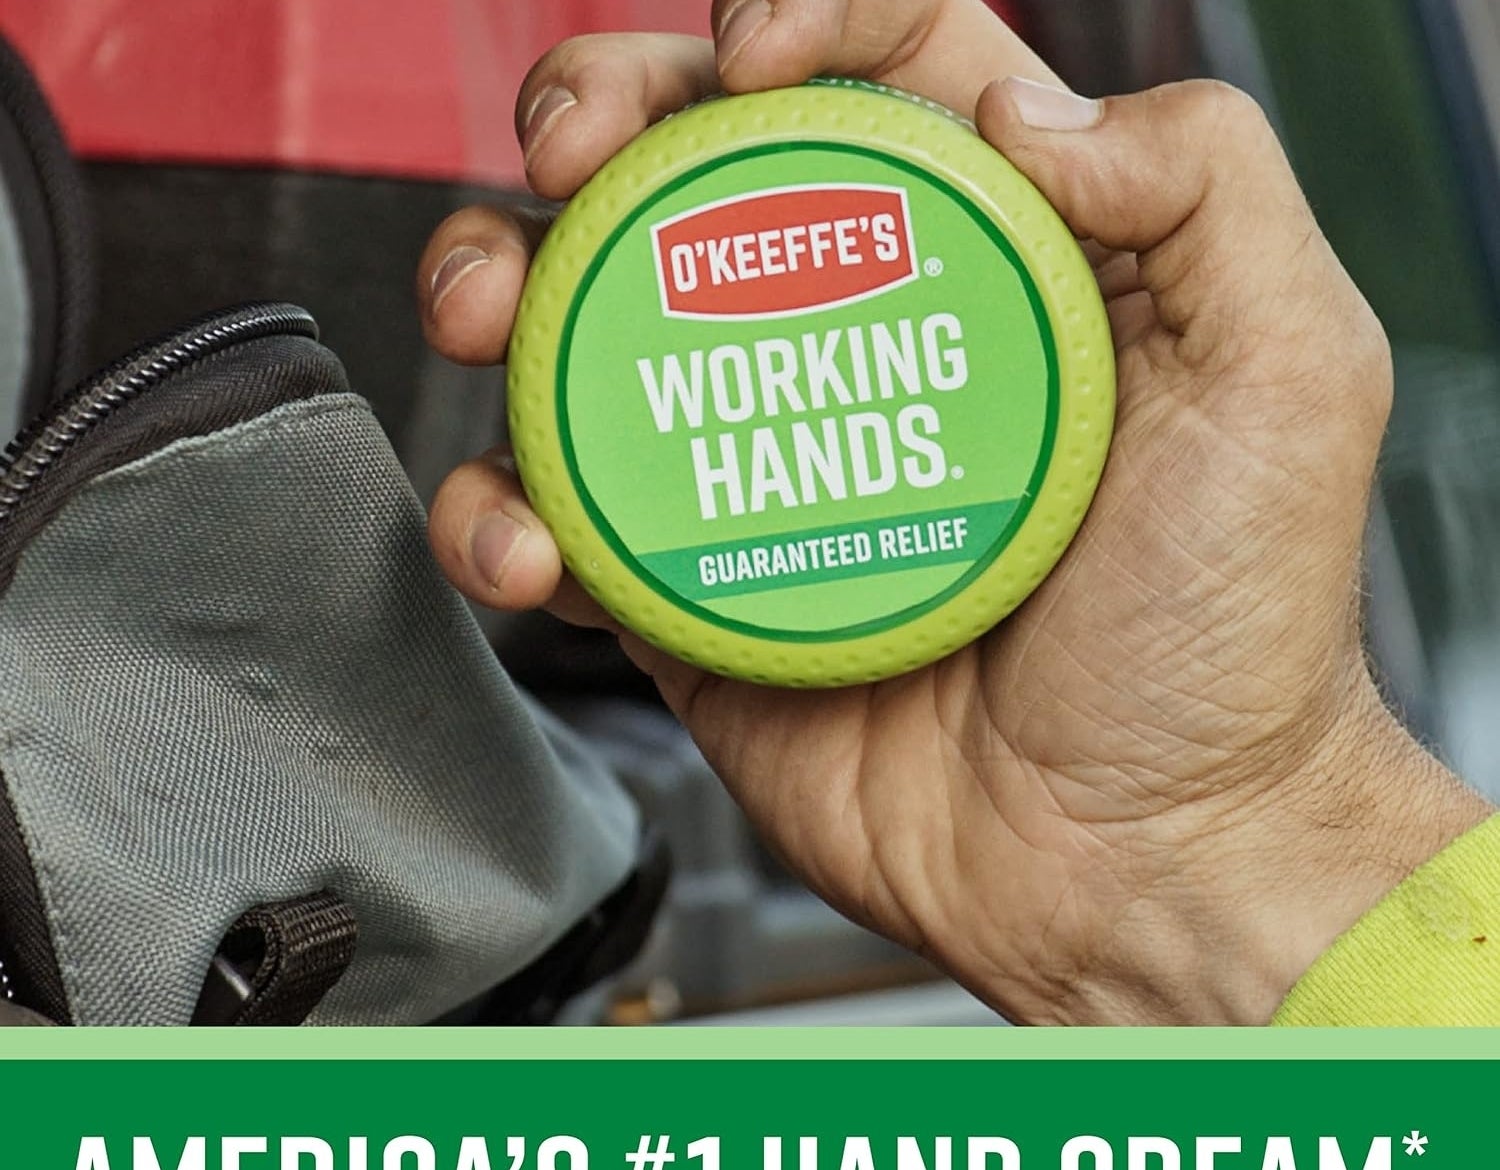 o&#x27;keefe&#x27;s working hands